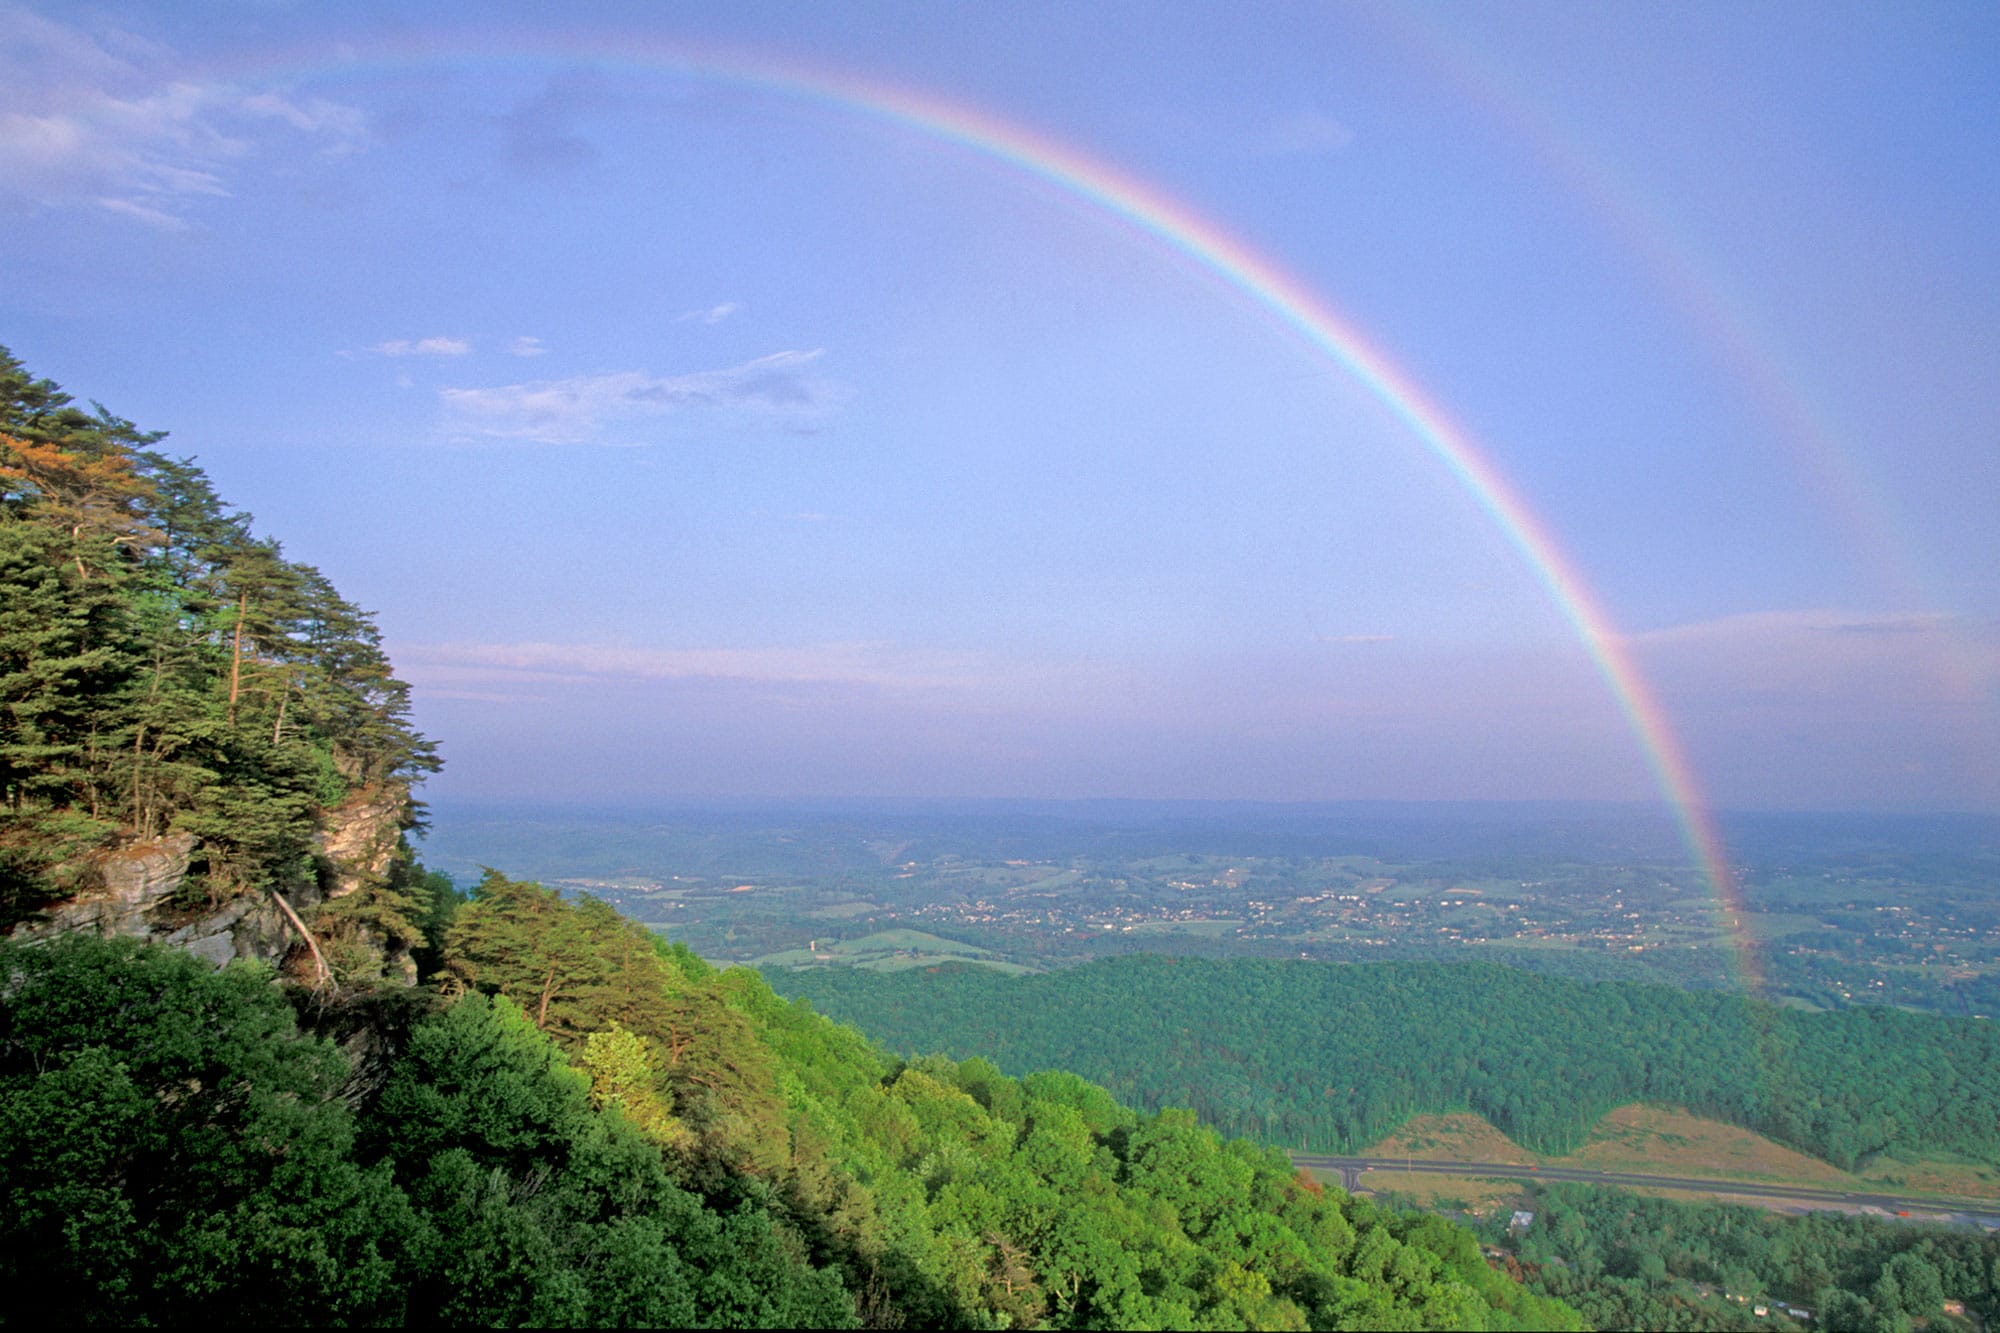 A rainbow is seen over a valley.